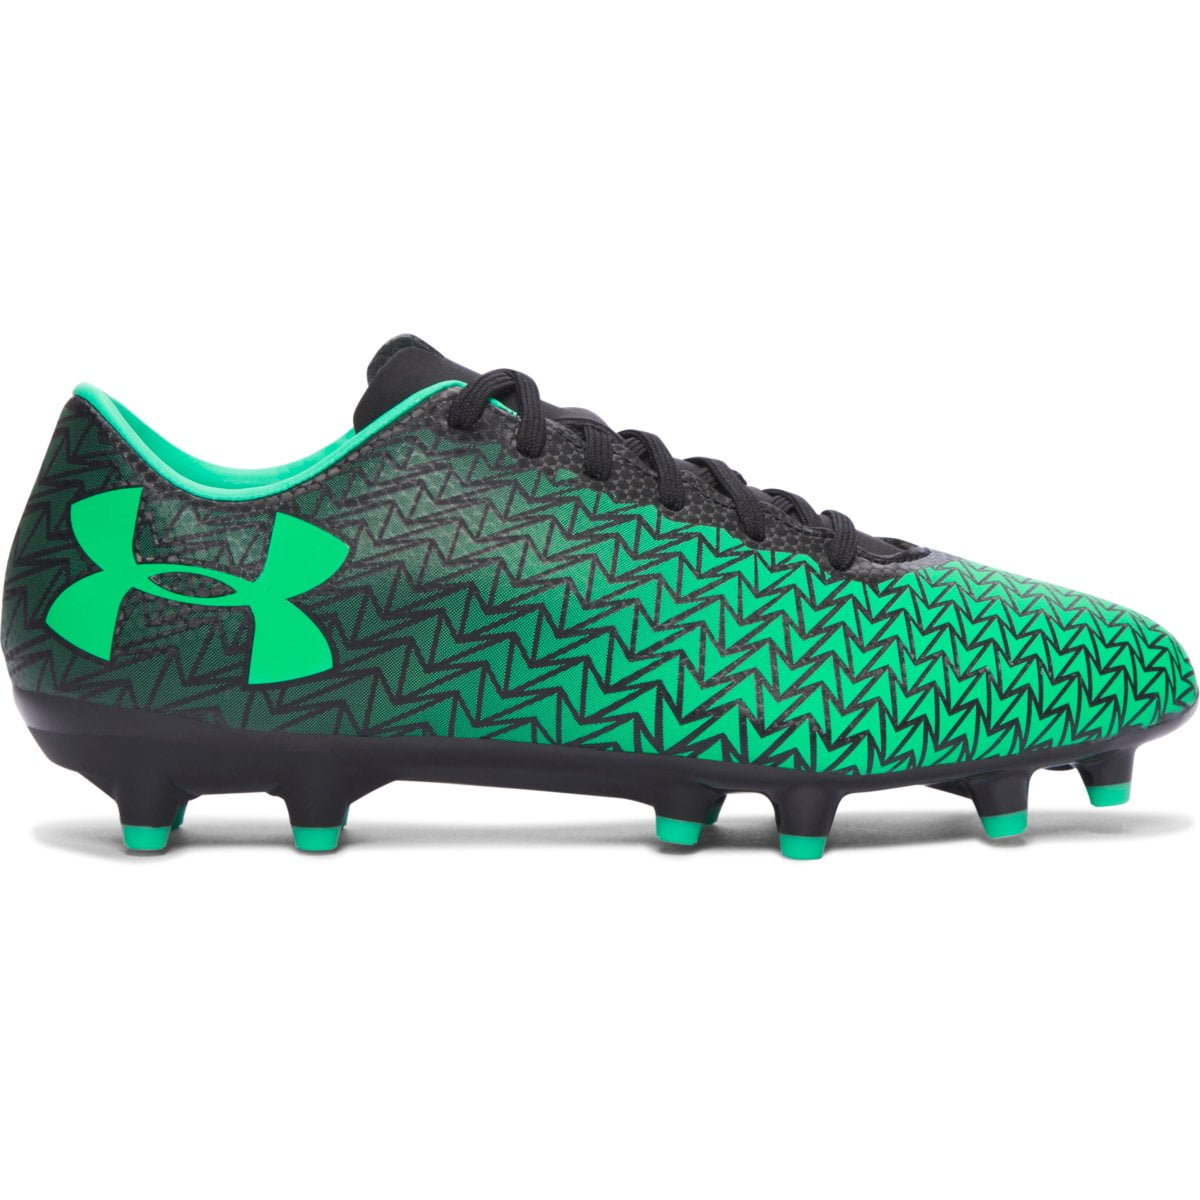 NEW WOMEN'S UNDER ARMOUR CF FORCE 3.0 FG SOCCER CLEATS & SPIKES FOOTBALL BOOTS 